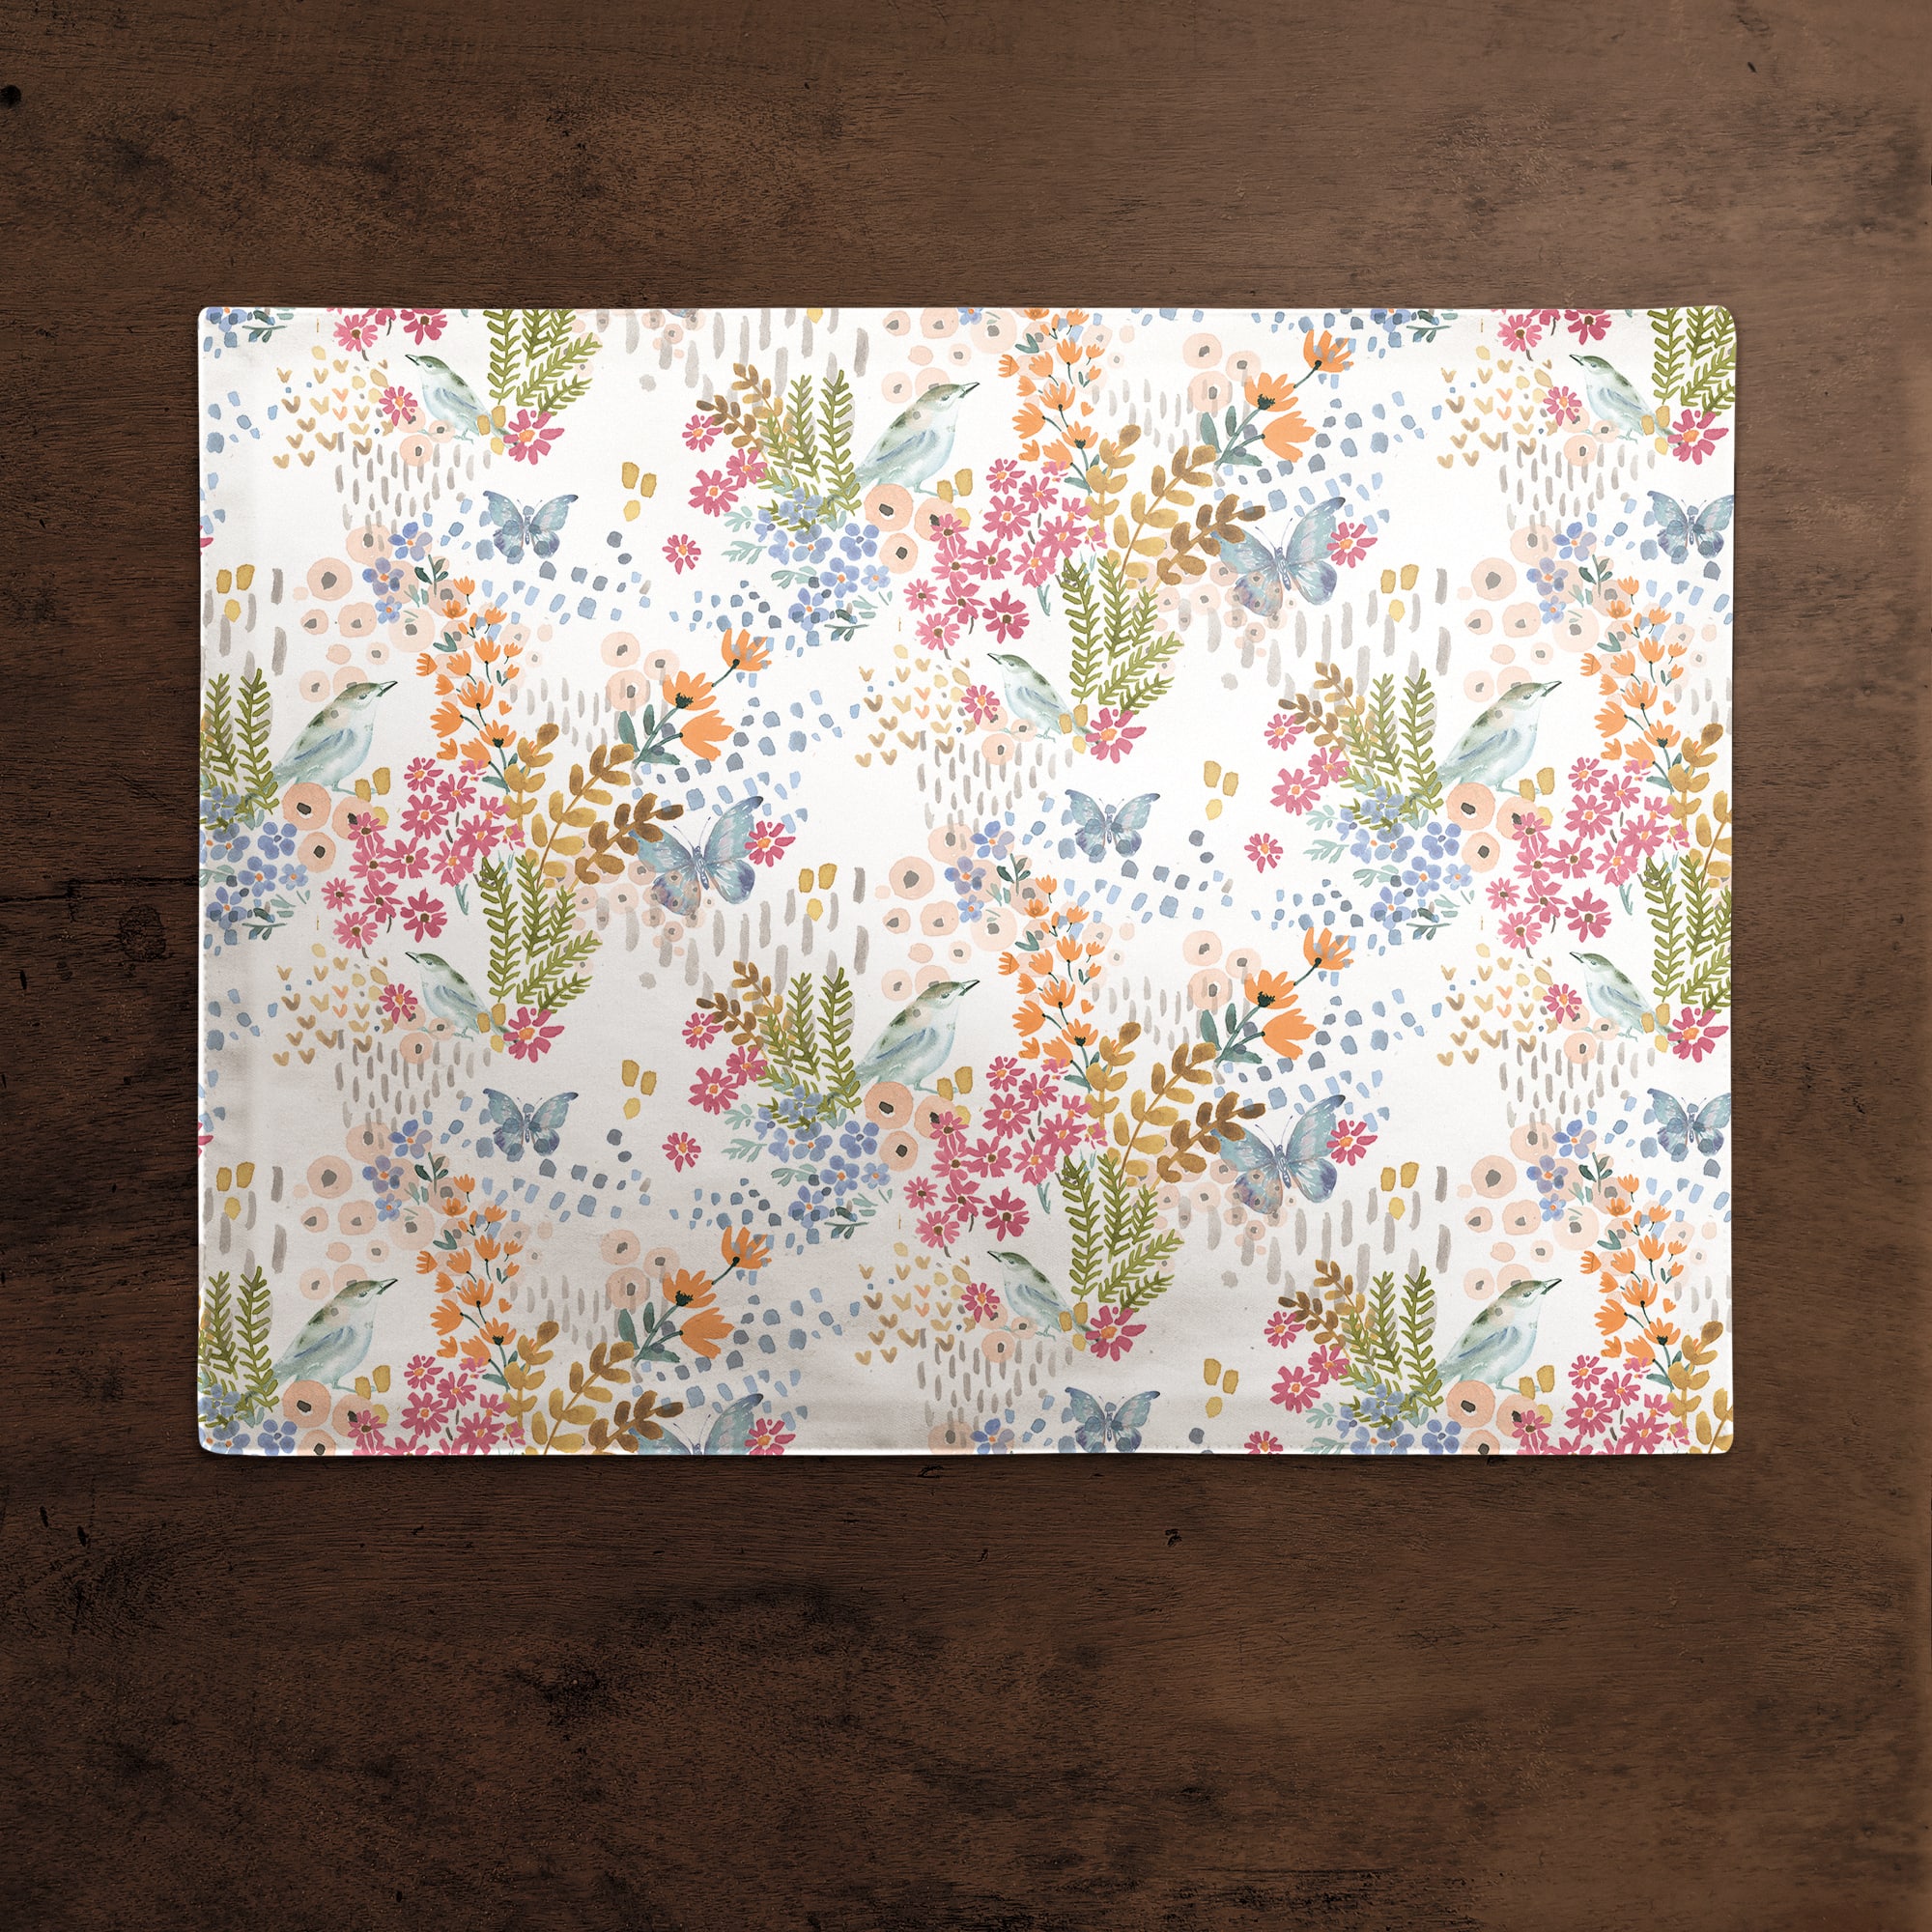 Butterfly Bird Floral Cotton Twill Placemat